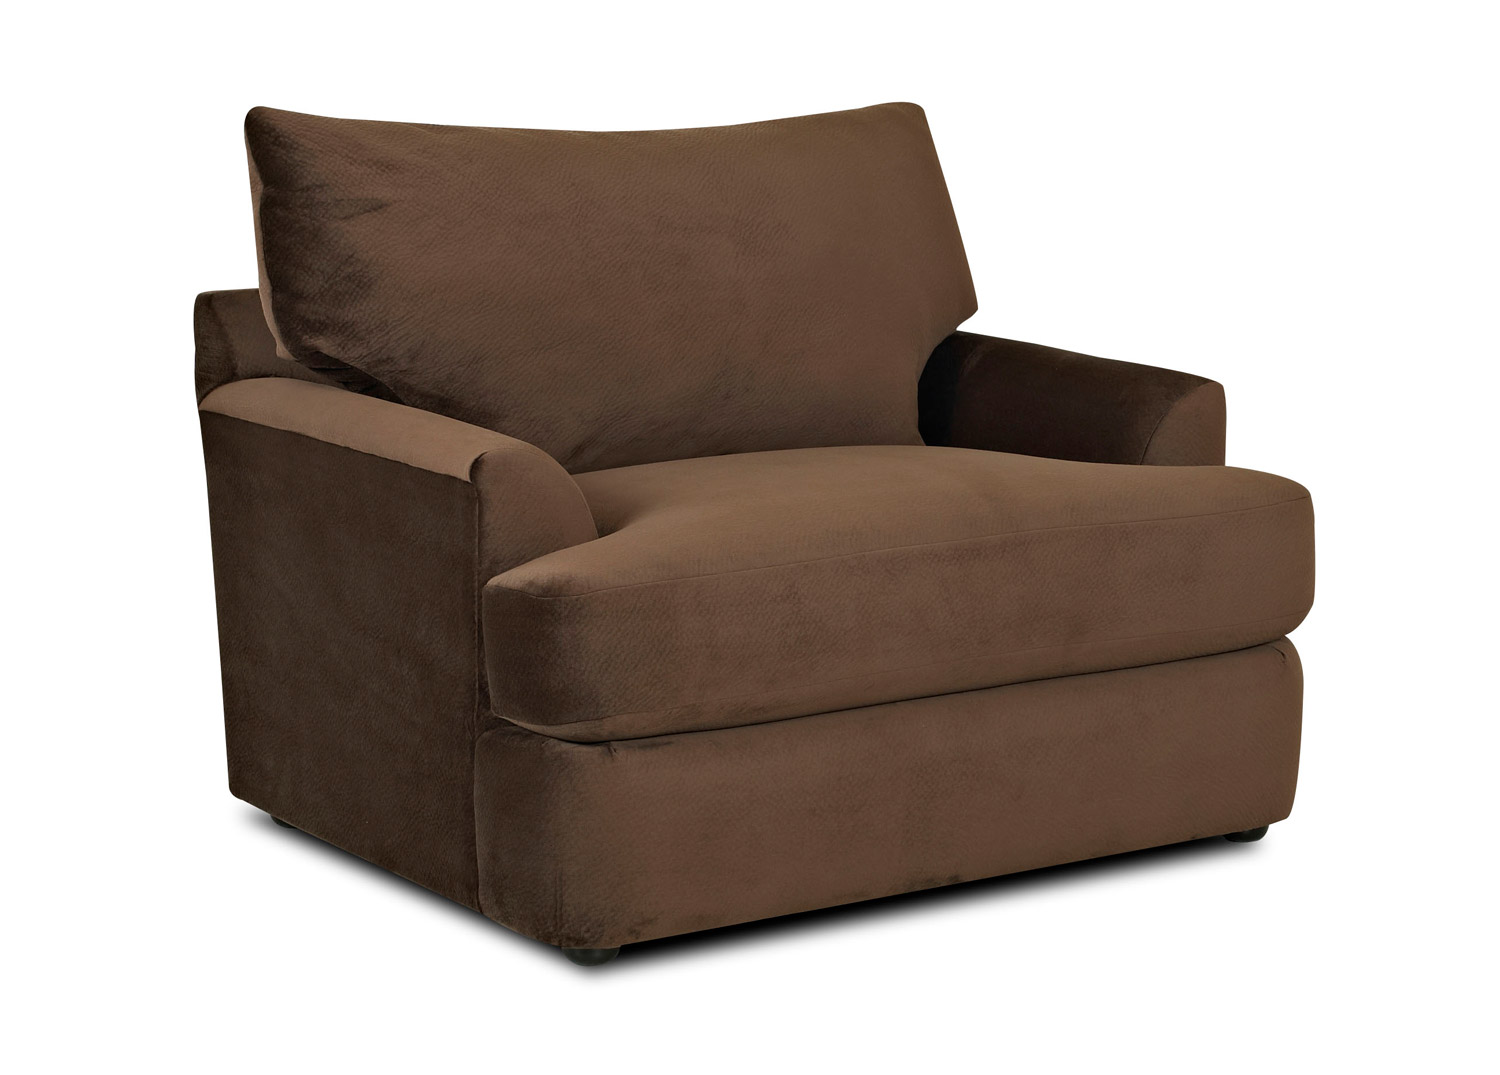 Klaussner Findley Chair - Challenger Chocolate